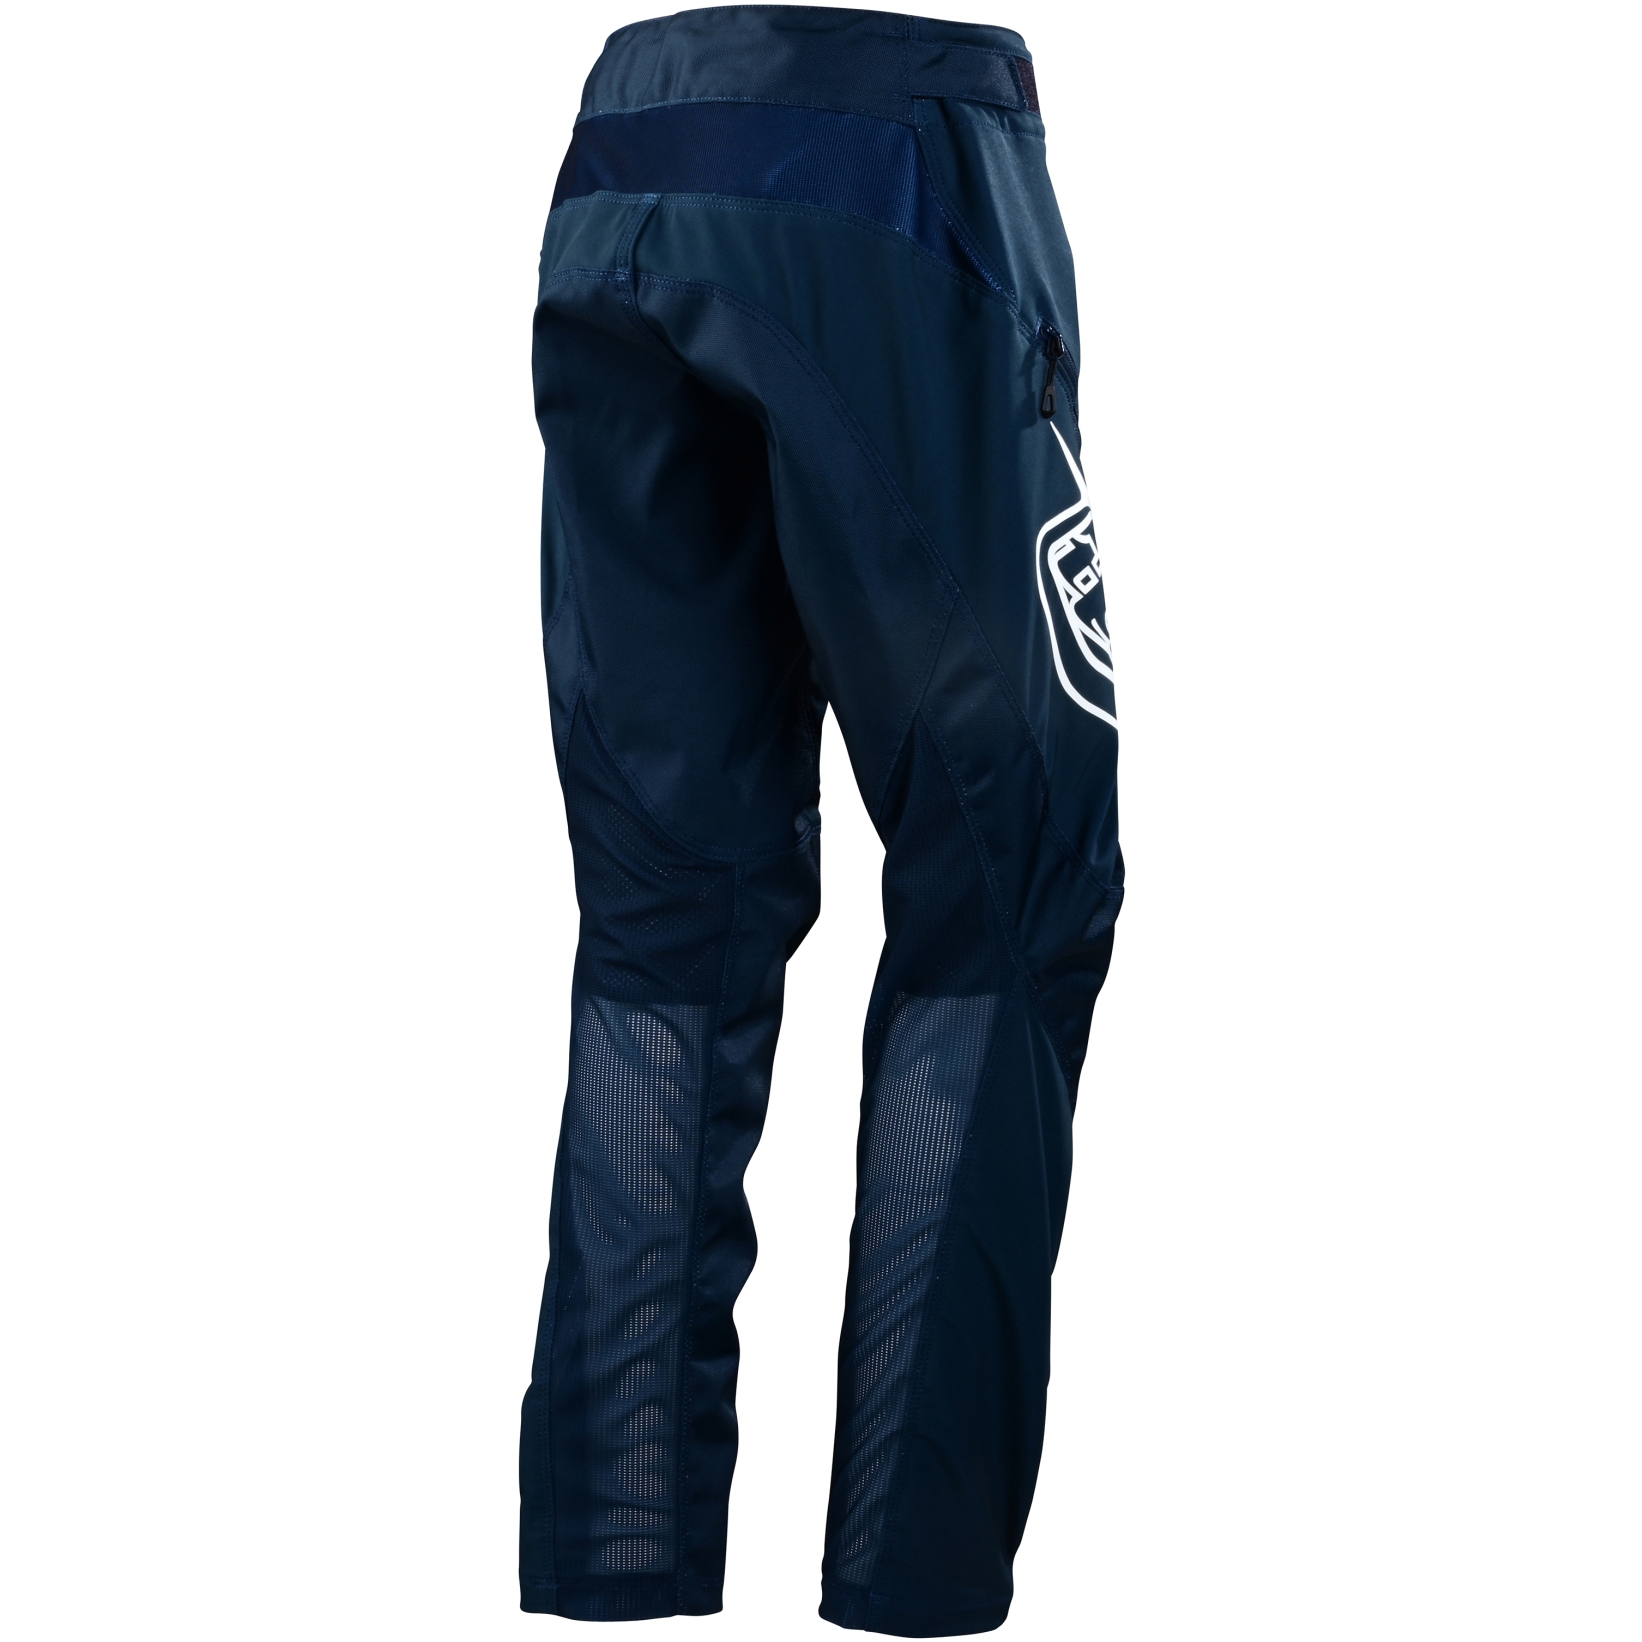 Troy Lee Designs Sprint Youth Pants - Solid Navy